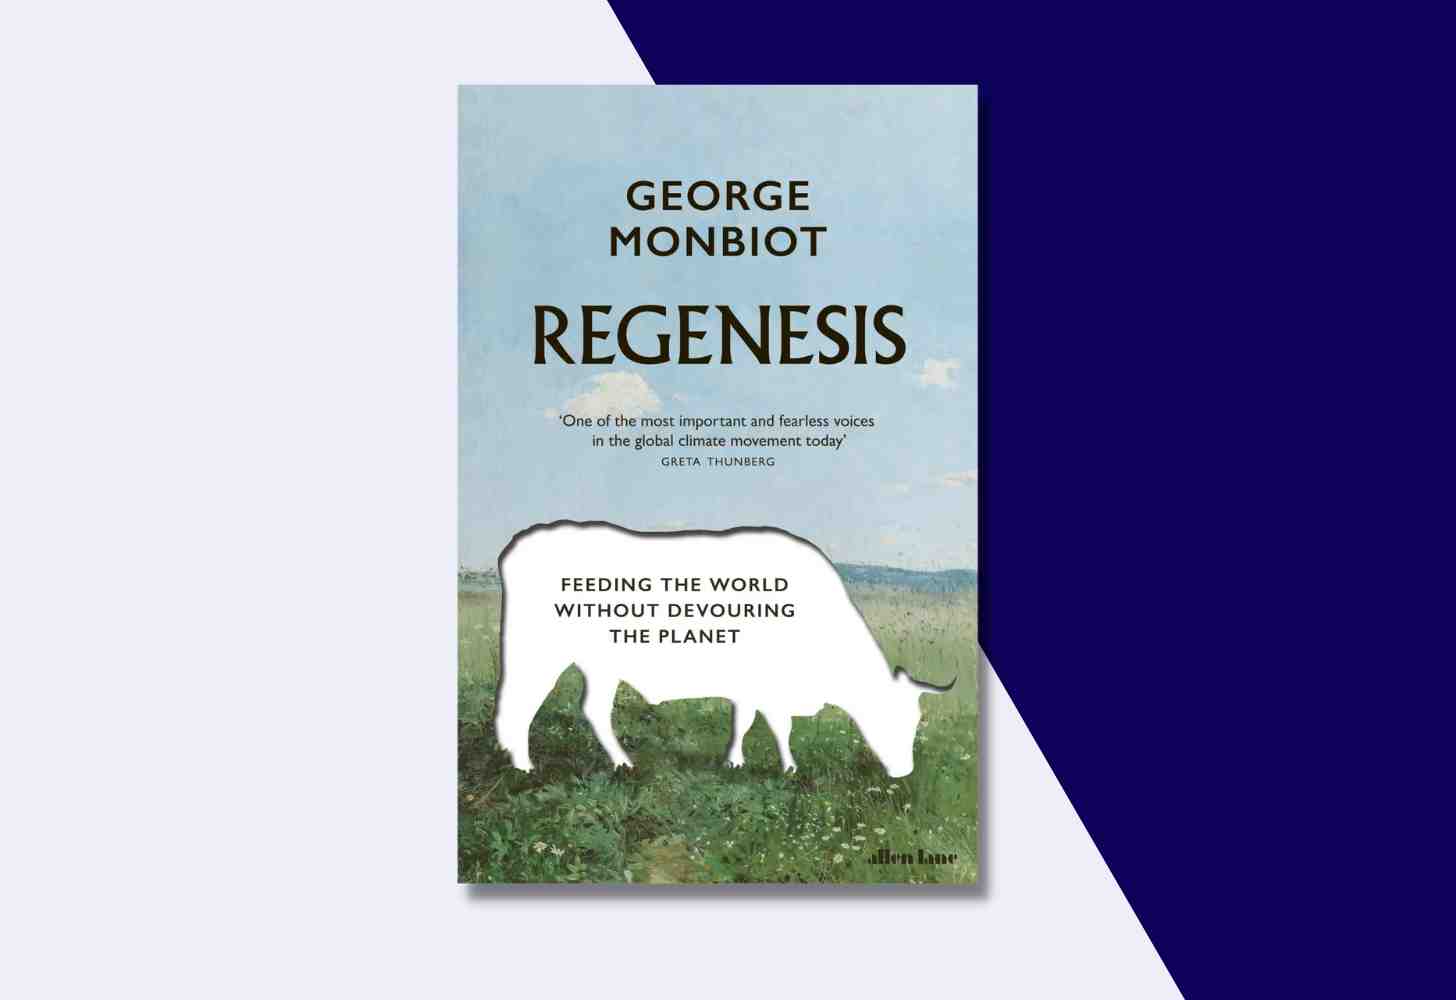 The Cover Of “Regenesis: Feeding the World Without Devouring the Planet” by George Monbiot